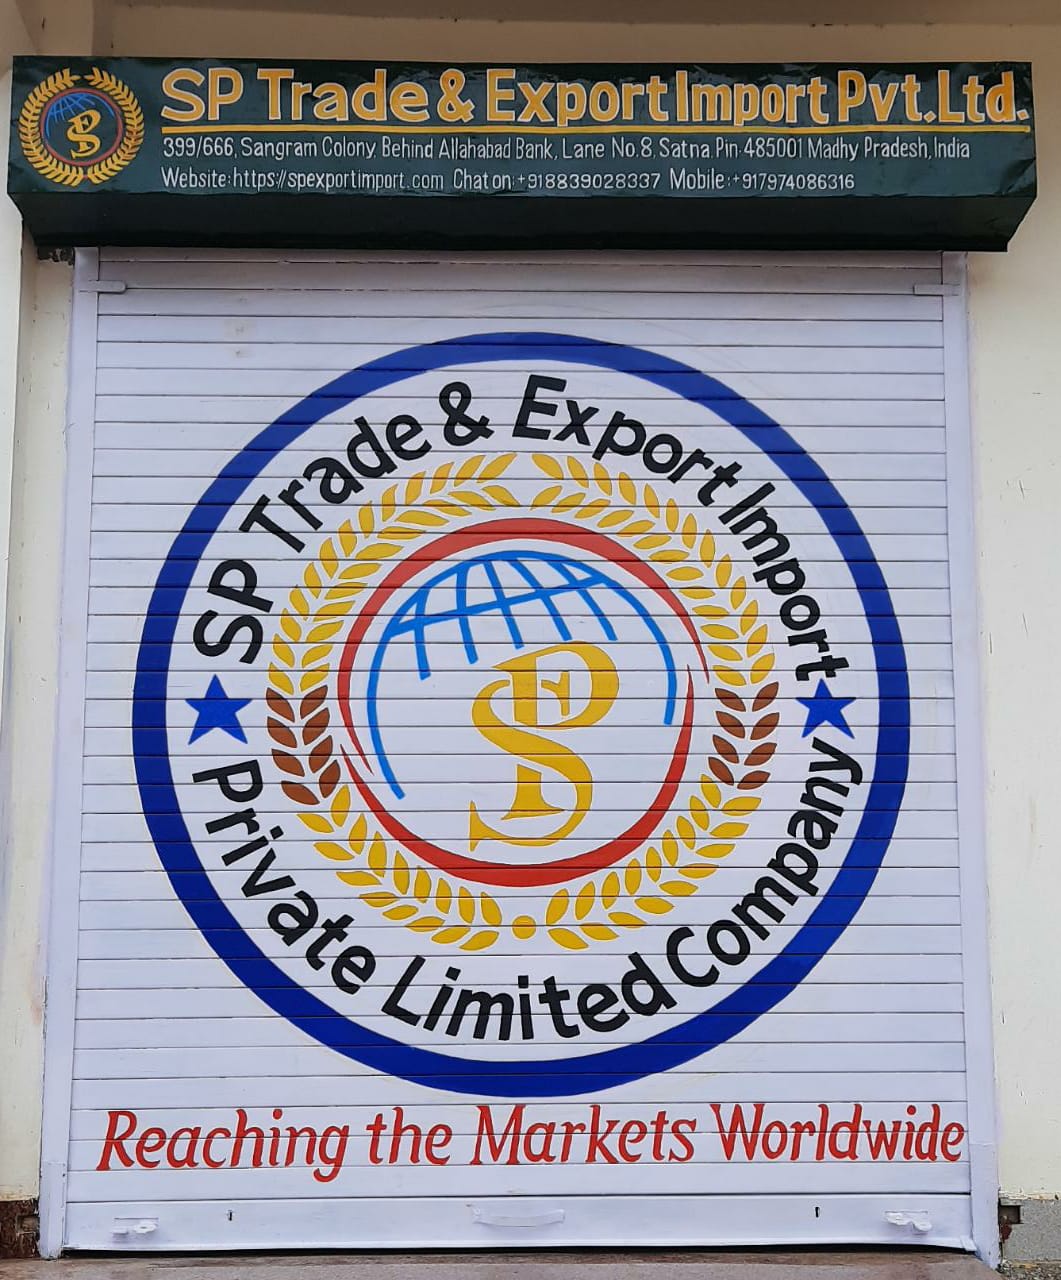 SP Trade & Export Import Private Limited